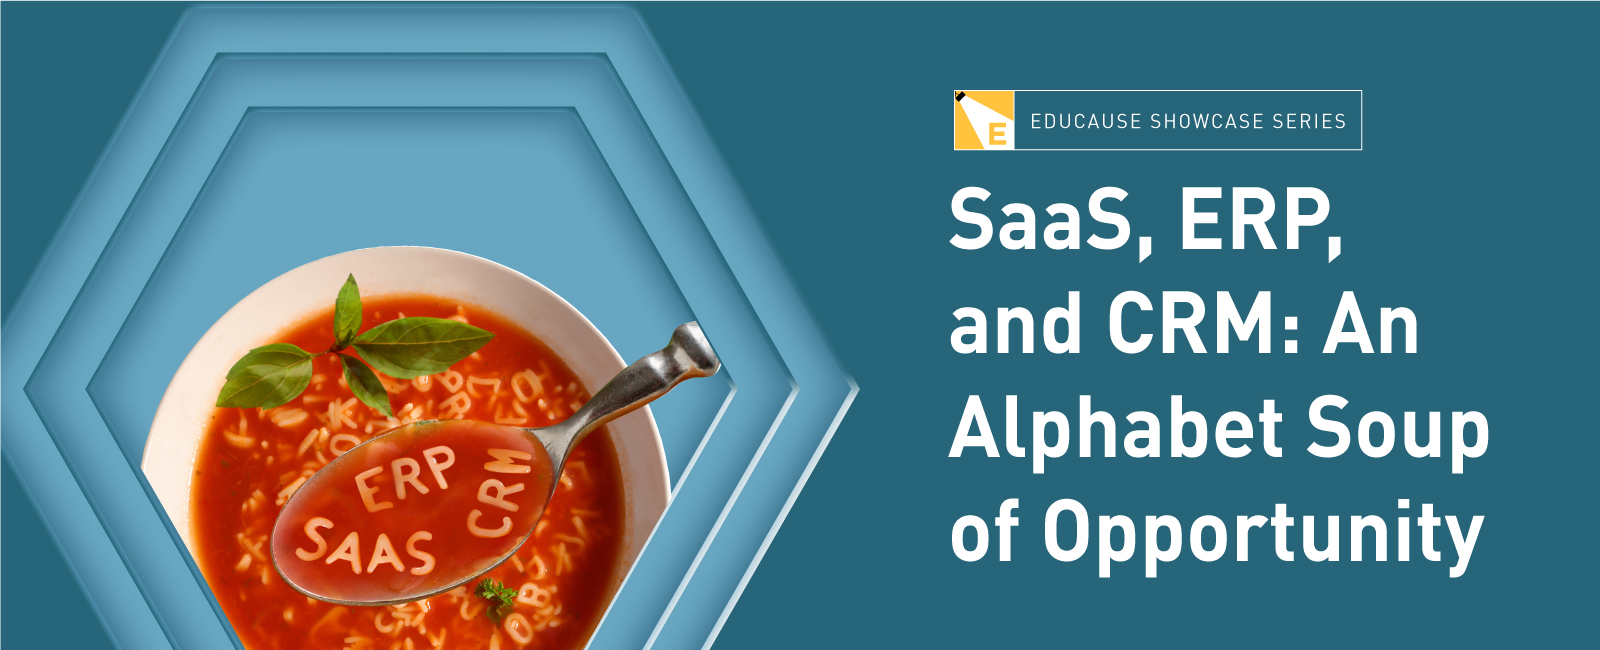 SaaS, ERP, and CRM: An Alphabet Soup of Opportunity